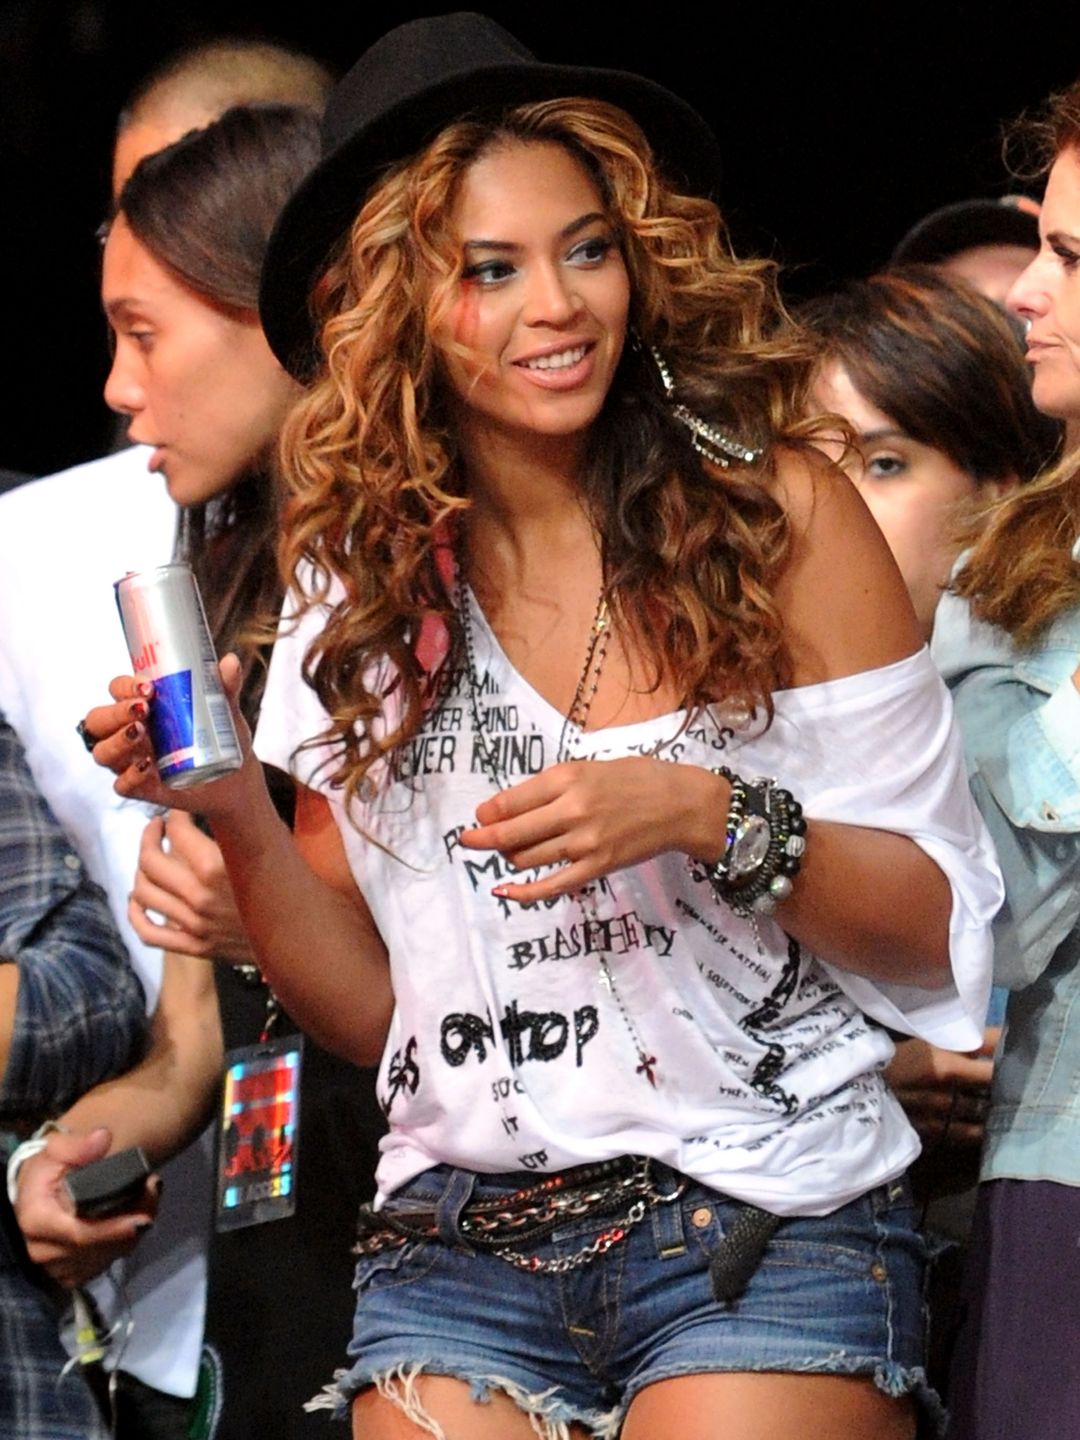 Singer Beyonce Knowles seen during Day 1 of the Coachella Valley Music & Art Festival 2010